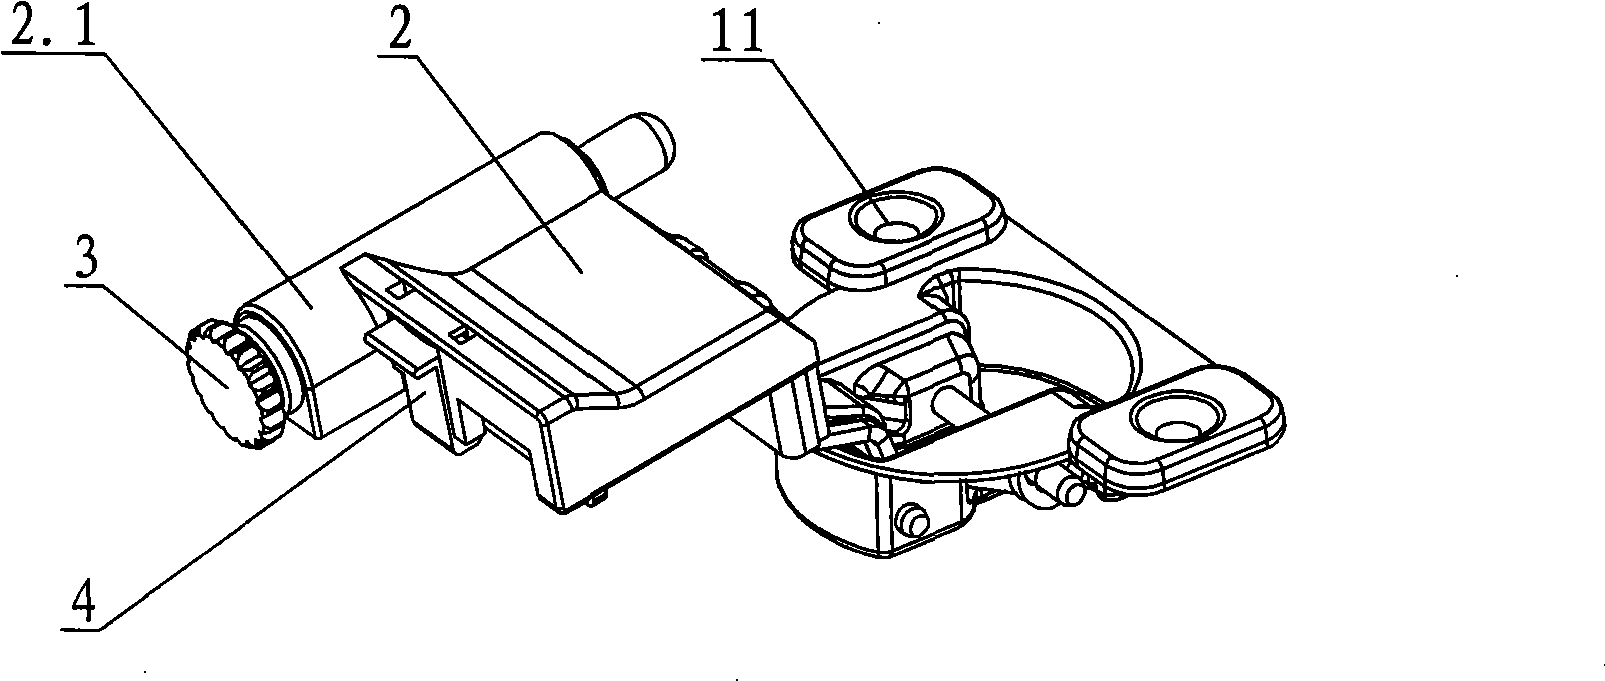 Front and rear regulation structure of hinge for furniture